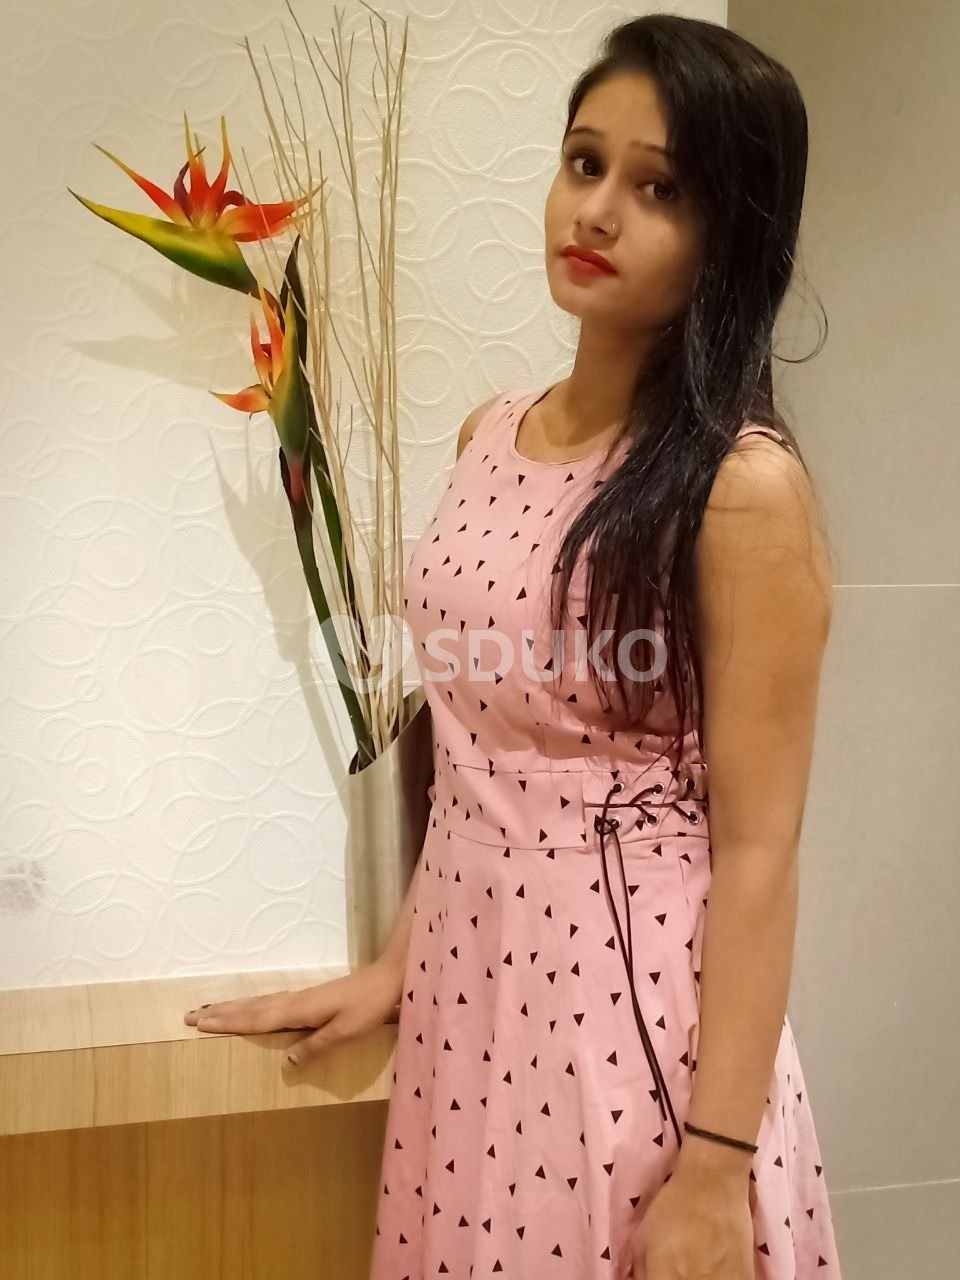 SPECIAL WHITEFIELD DOORSTEP HIGH PROFESSIONAL DIVYA Escorts AGENCY TOP MODEL PROVIDED. BOOK NOW